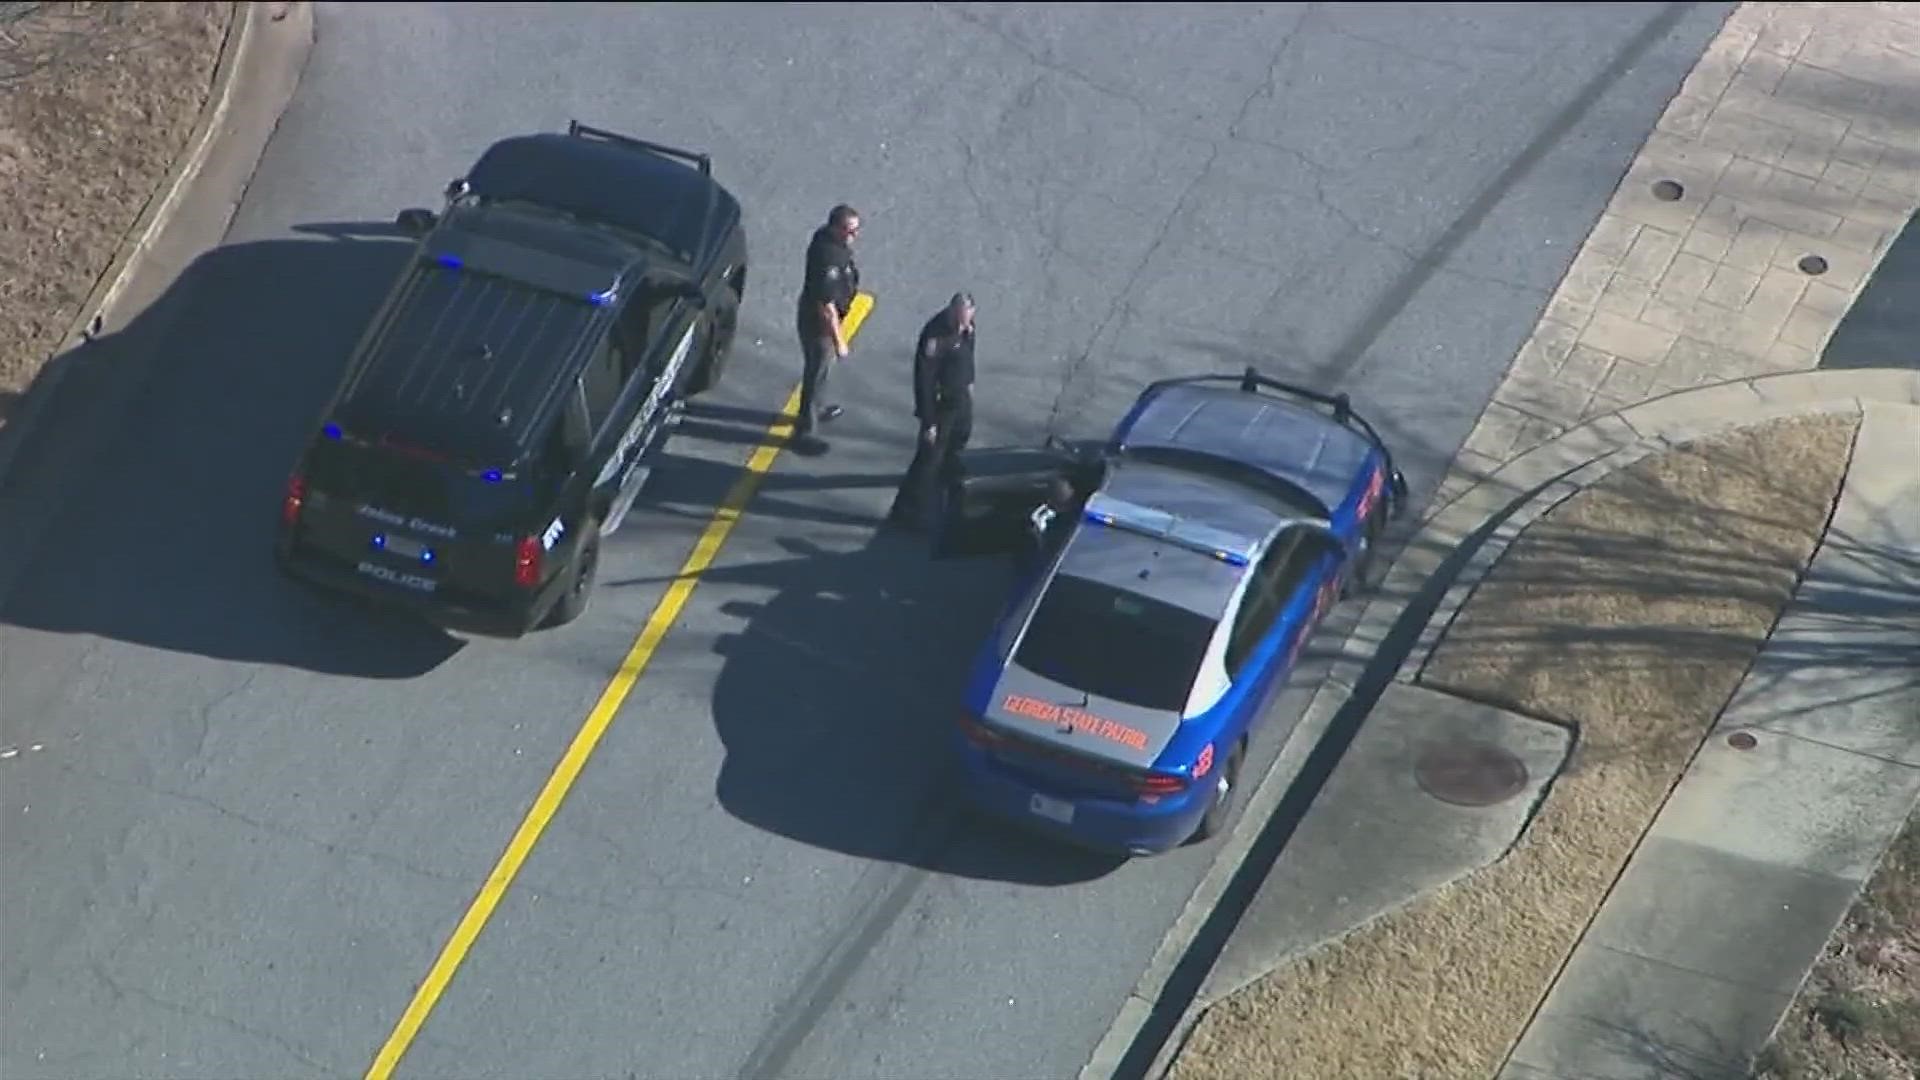 The chase ended on Old Alabama Road in a shopping center, according to a Johns Creek Police social media post.